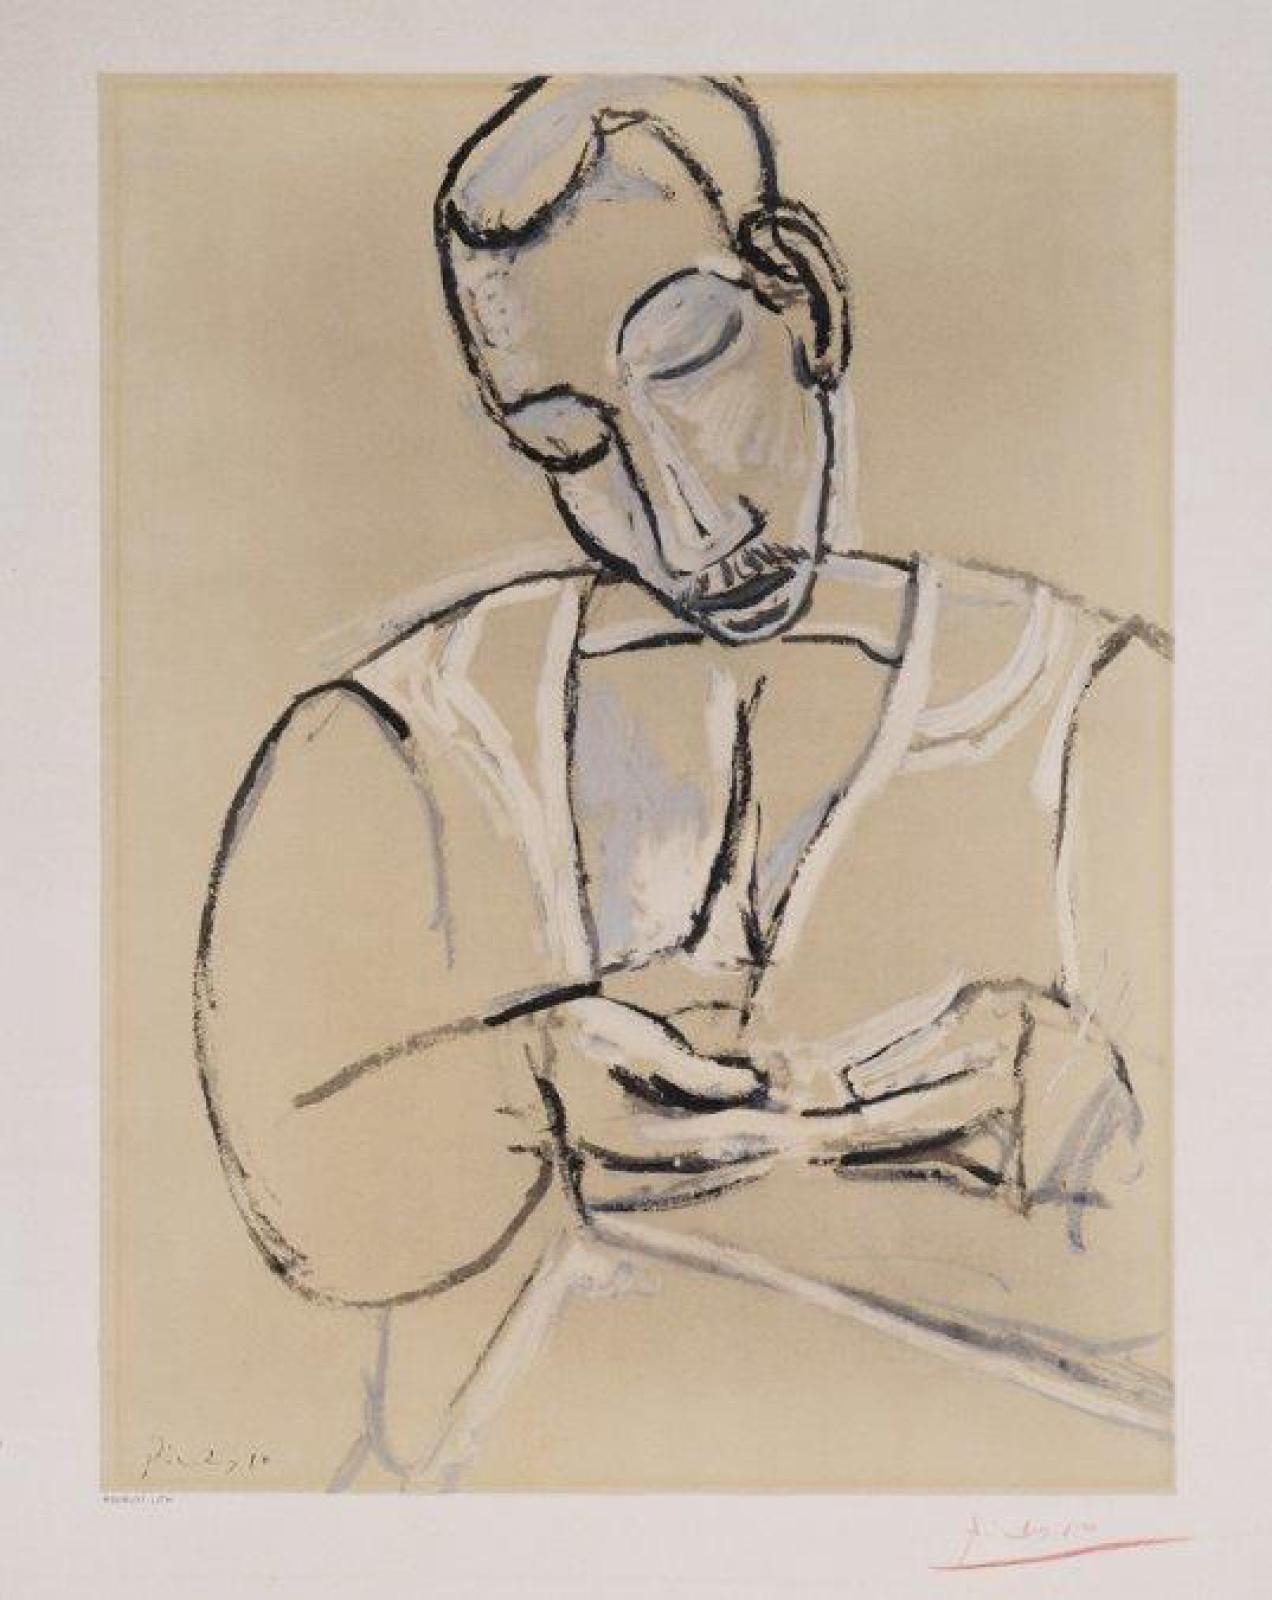 Pablo Picasso, DRAWINGS FROM HALF A CENTURY AGO (Circa 1956)